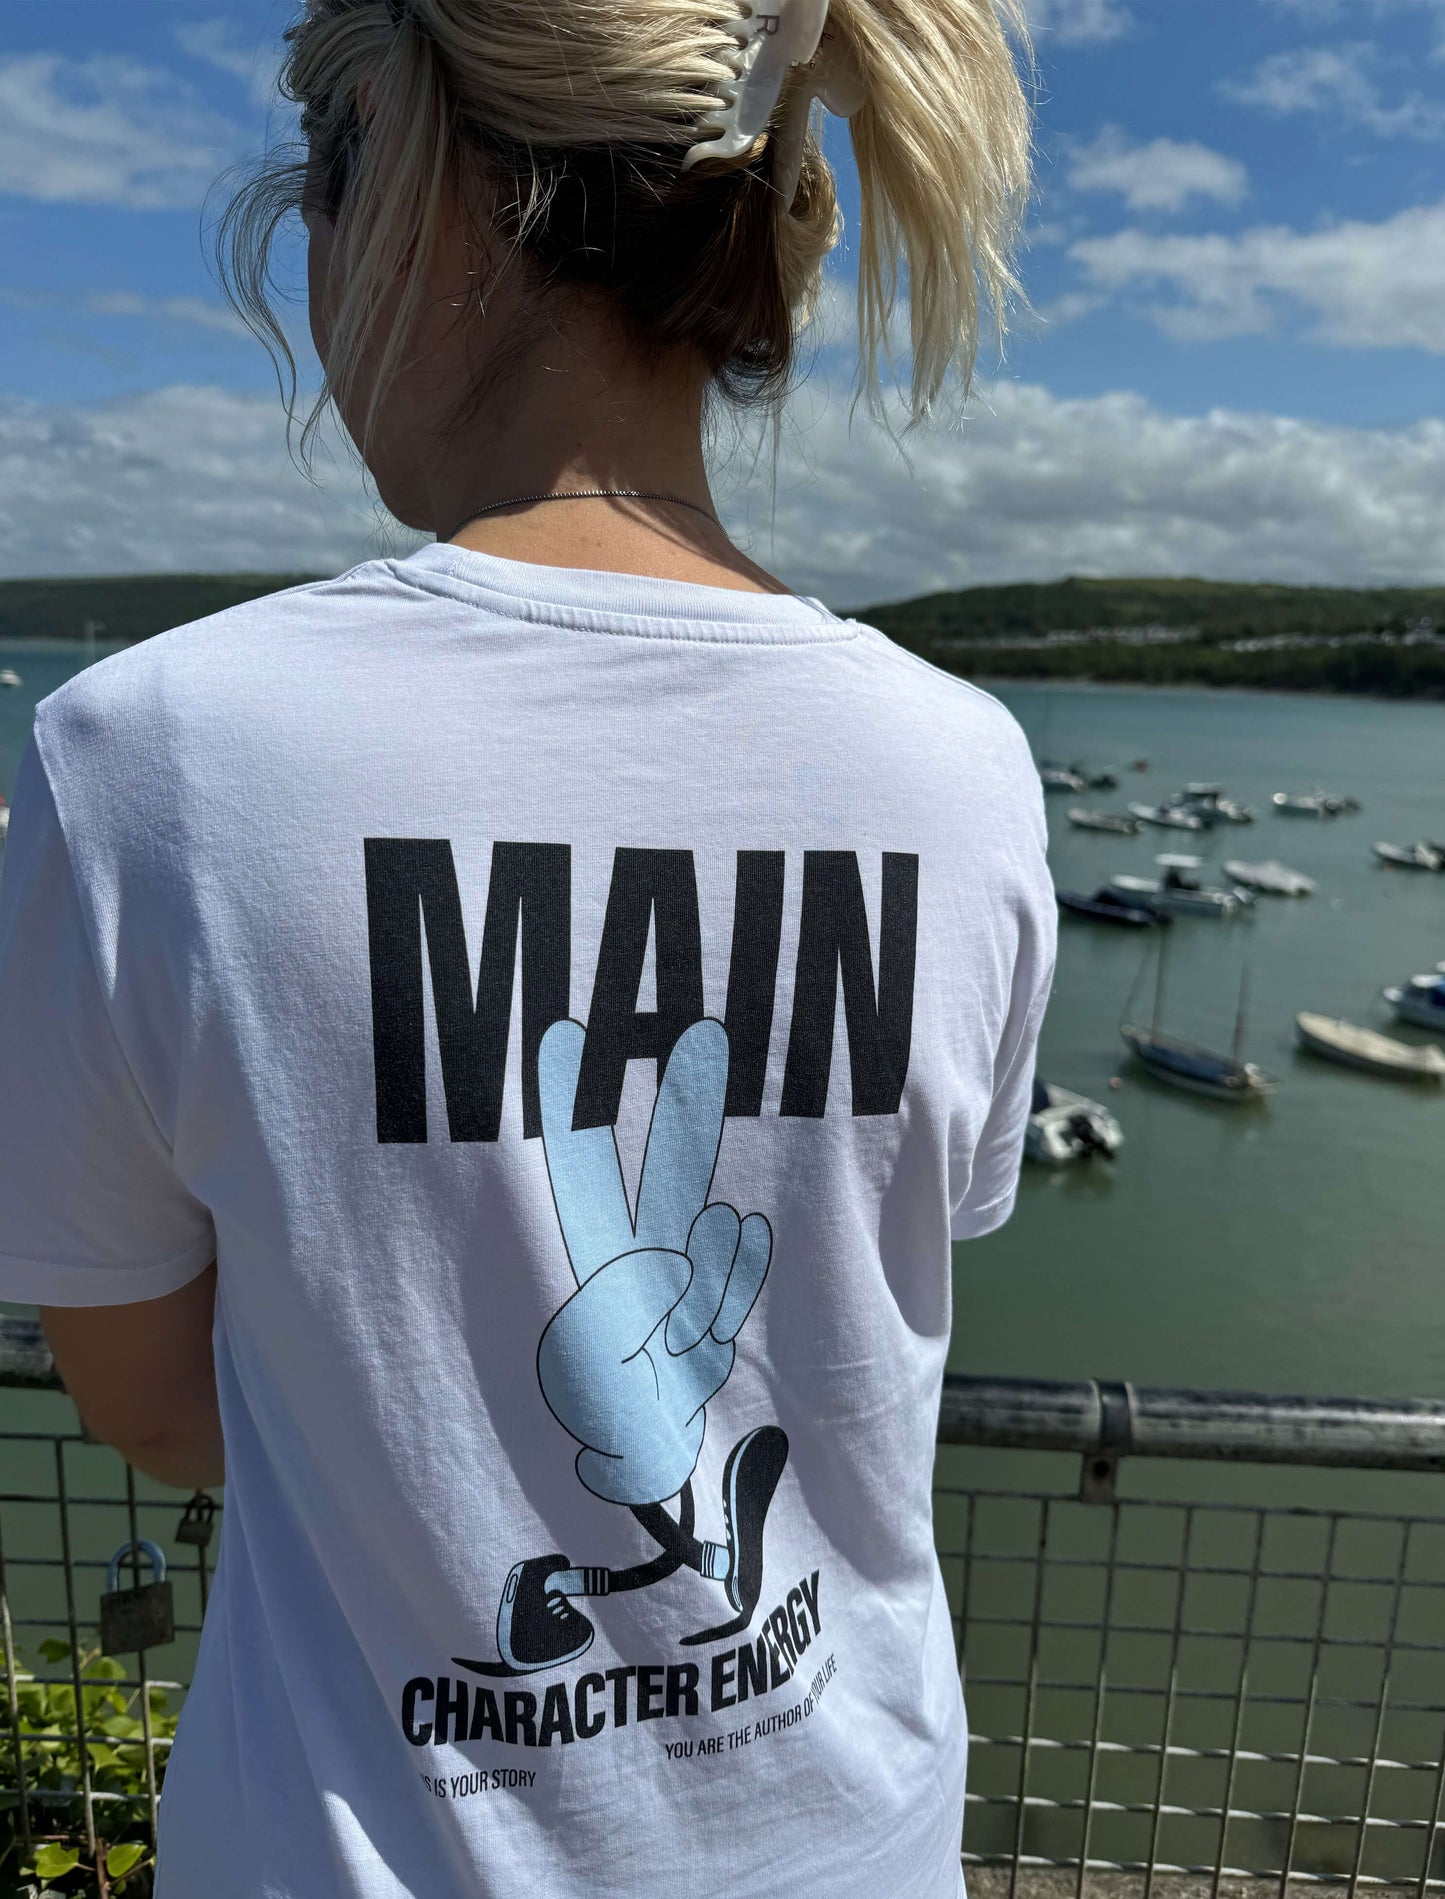 Main character energy tee in blue on holiday, overlooking beach and boats